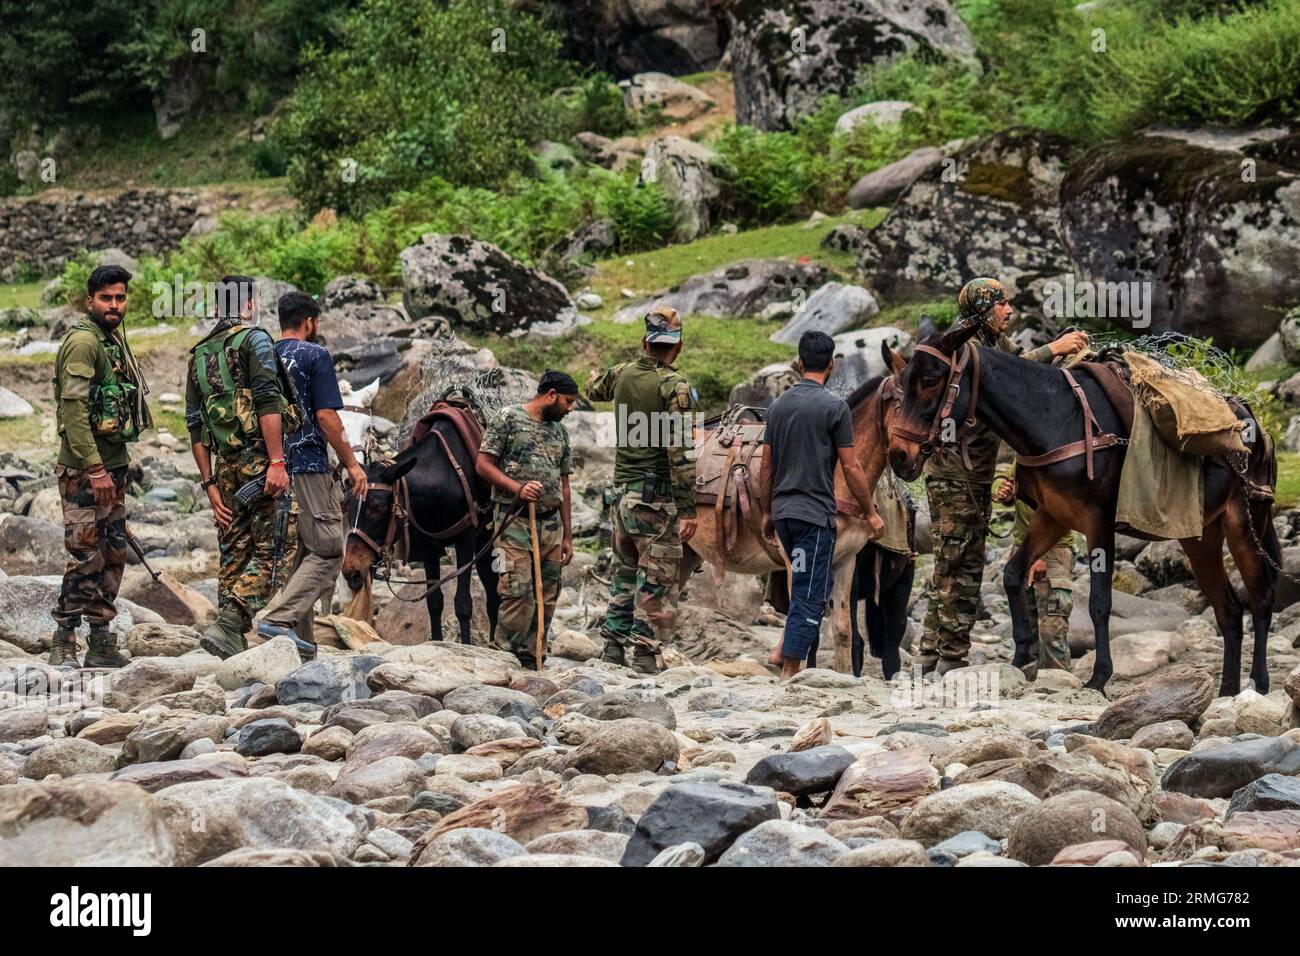 Indian army soldiers seen with their horses as they prepare to head towards their bunkers, at Neelam river or Kishan Ganga that has divided Kashmir into two parts controlled by nuclear rivals India and Pakistan. The river acts as a disputed line of control and flows through a village called Keran from both sides which is located on the northern side of Indian Kashmir's Border district Kupwara some 150kms from Srinagar and 93kms from Muzaffarabad, in the Pakistan side of Kashmir. (Photo by Faisal Bashir/SOPA Images/Sipa USA) Stock Photo